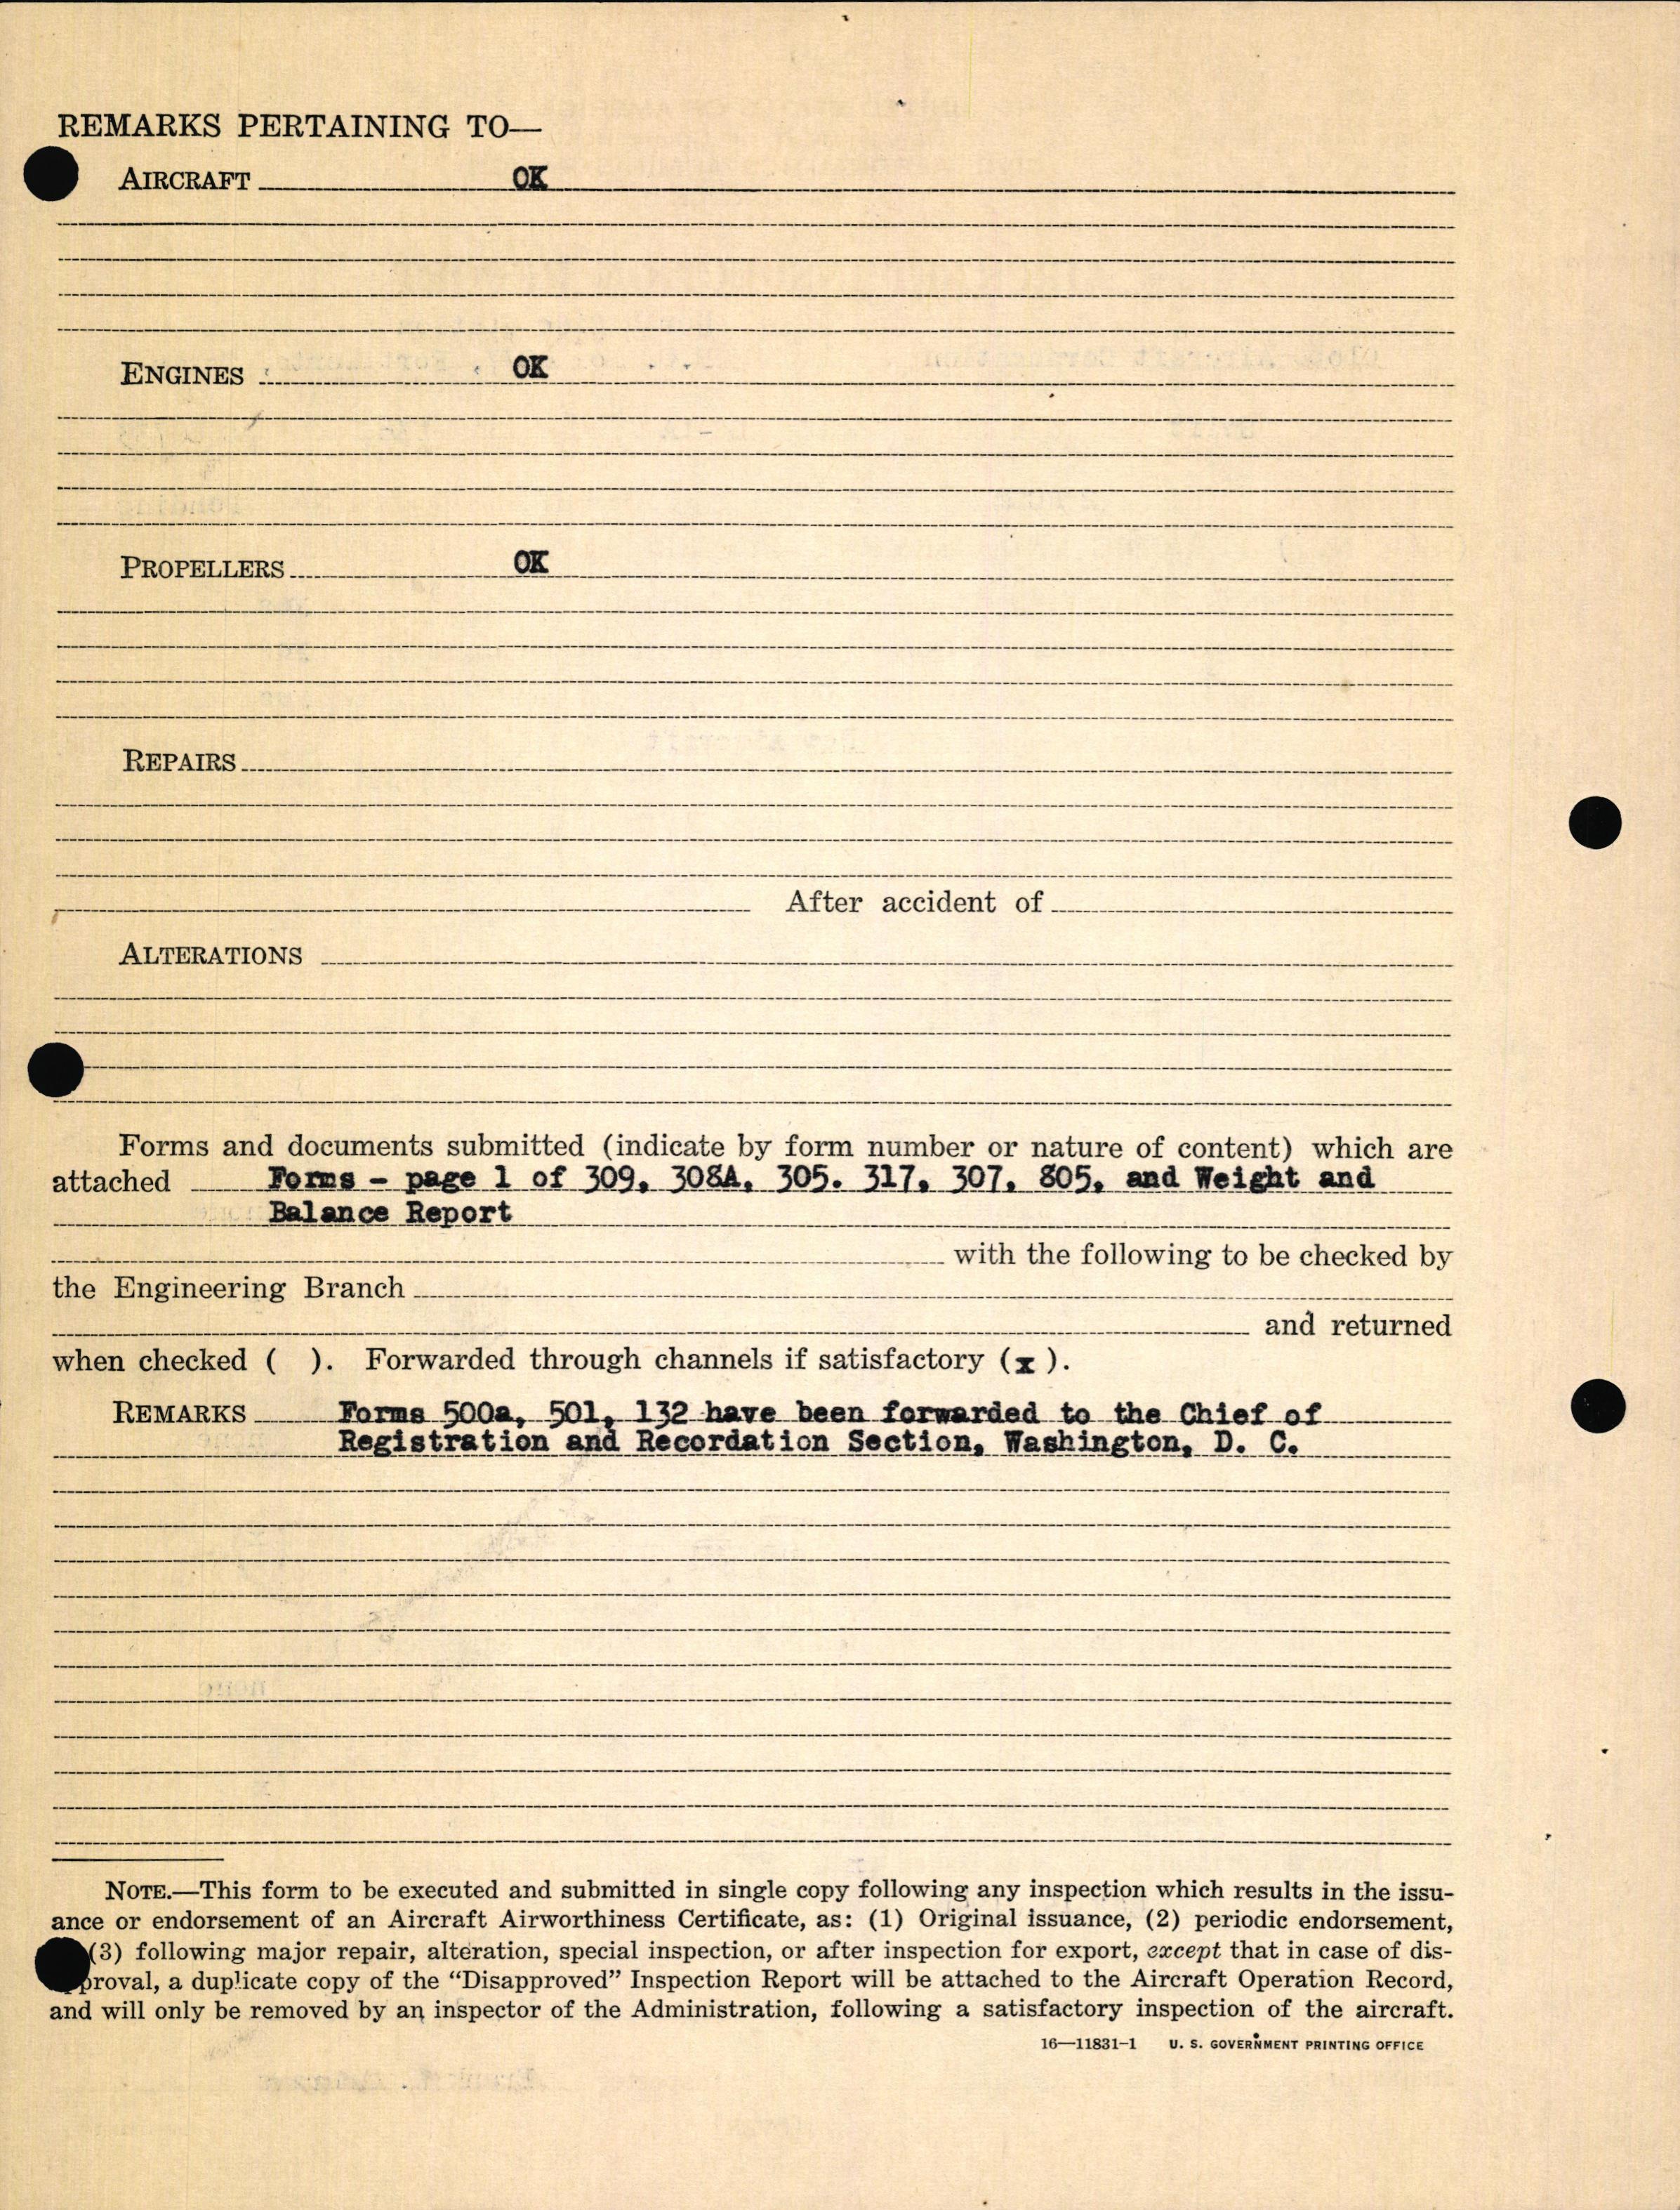 Sample page 6 from AirCorps Library document: Technical Information for Serial Number 136